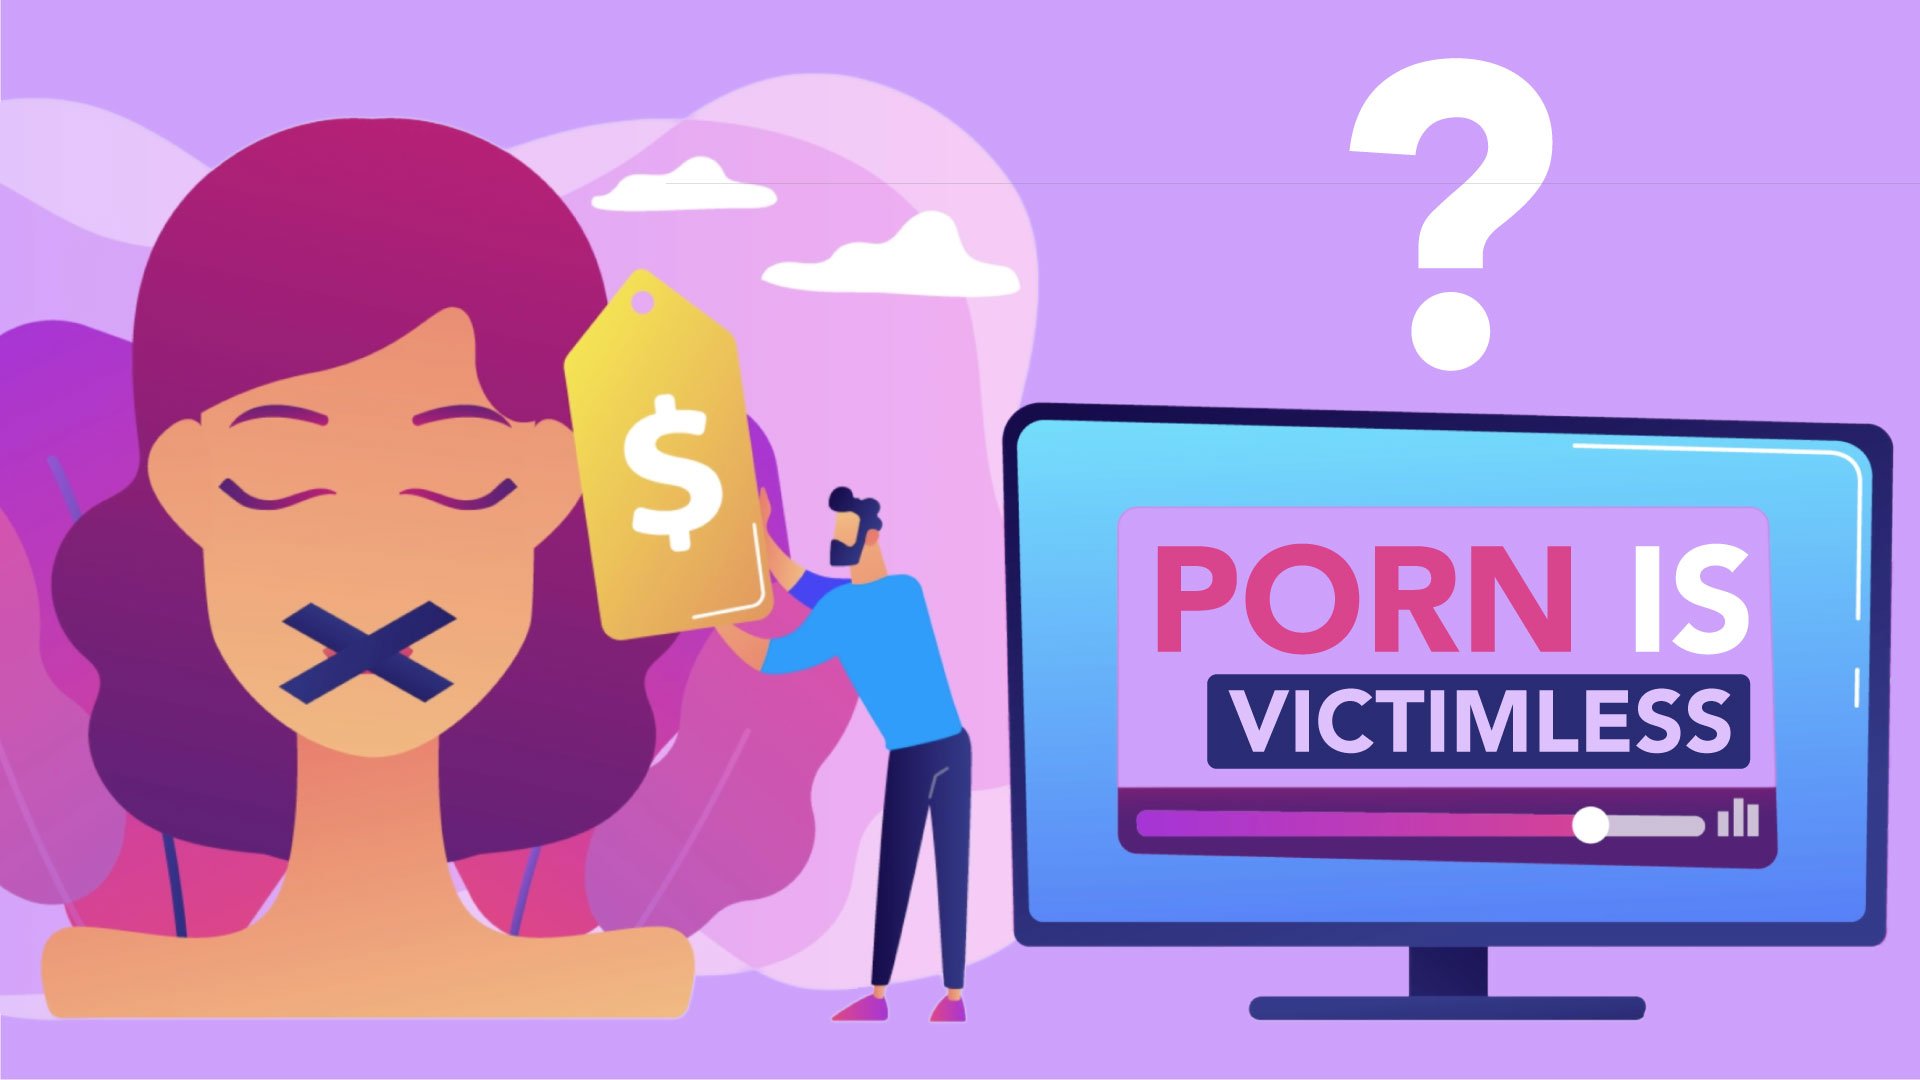 Porn is Victimless?